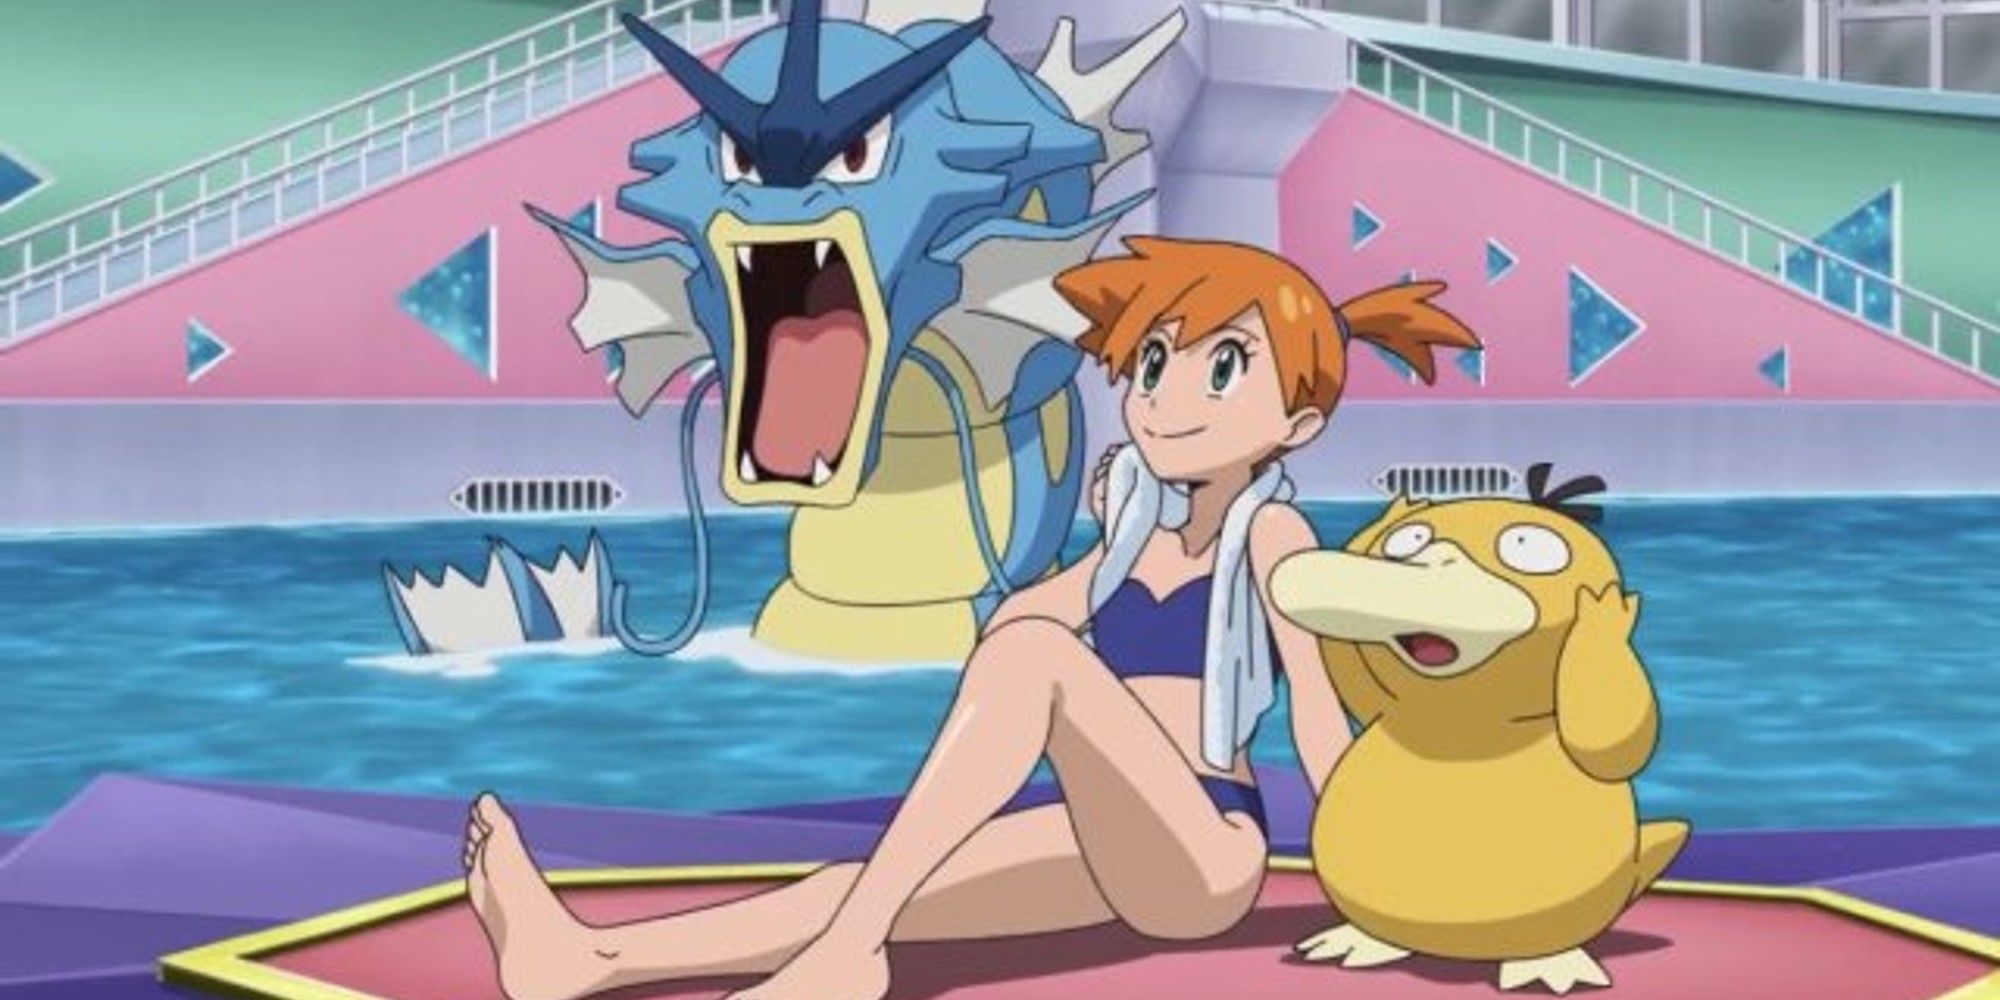 Misty with her Psyduck and Gyarados from the Pokemon anime, in a pool in Cerulean Gym